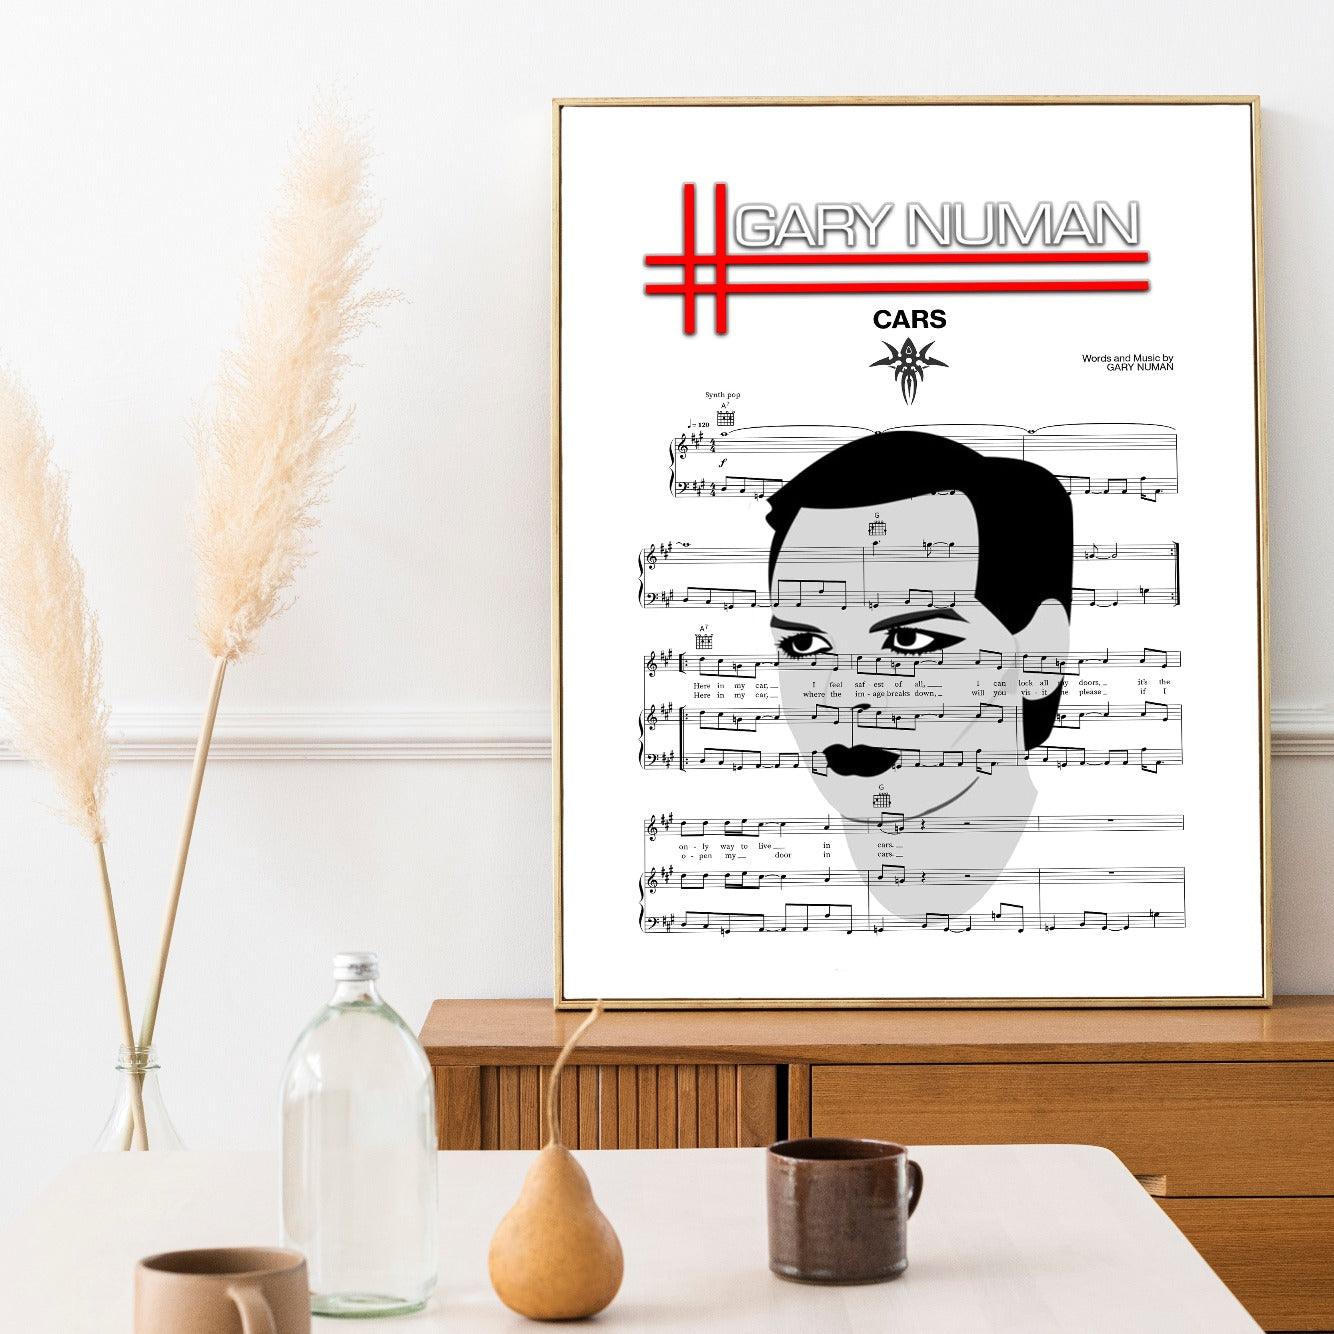 Wall art that is unique, personal and a talking point A real piece of music history and one of Gary Numan's most iconic pieces of work Something a bit different for your wall art, a real talking point and a great way to show off your personality.